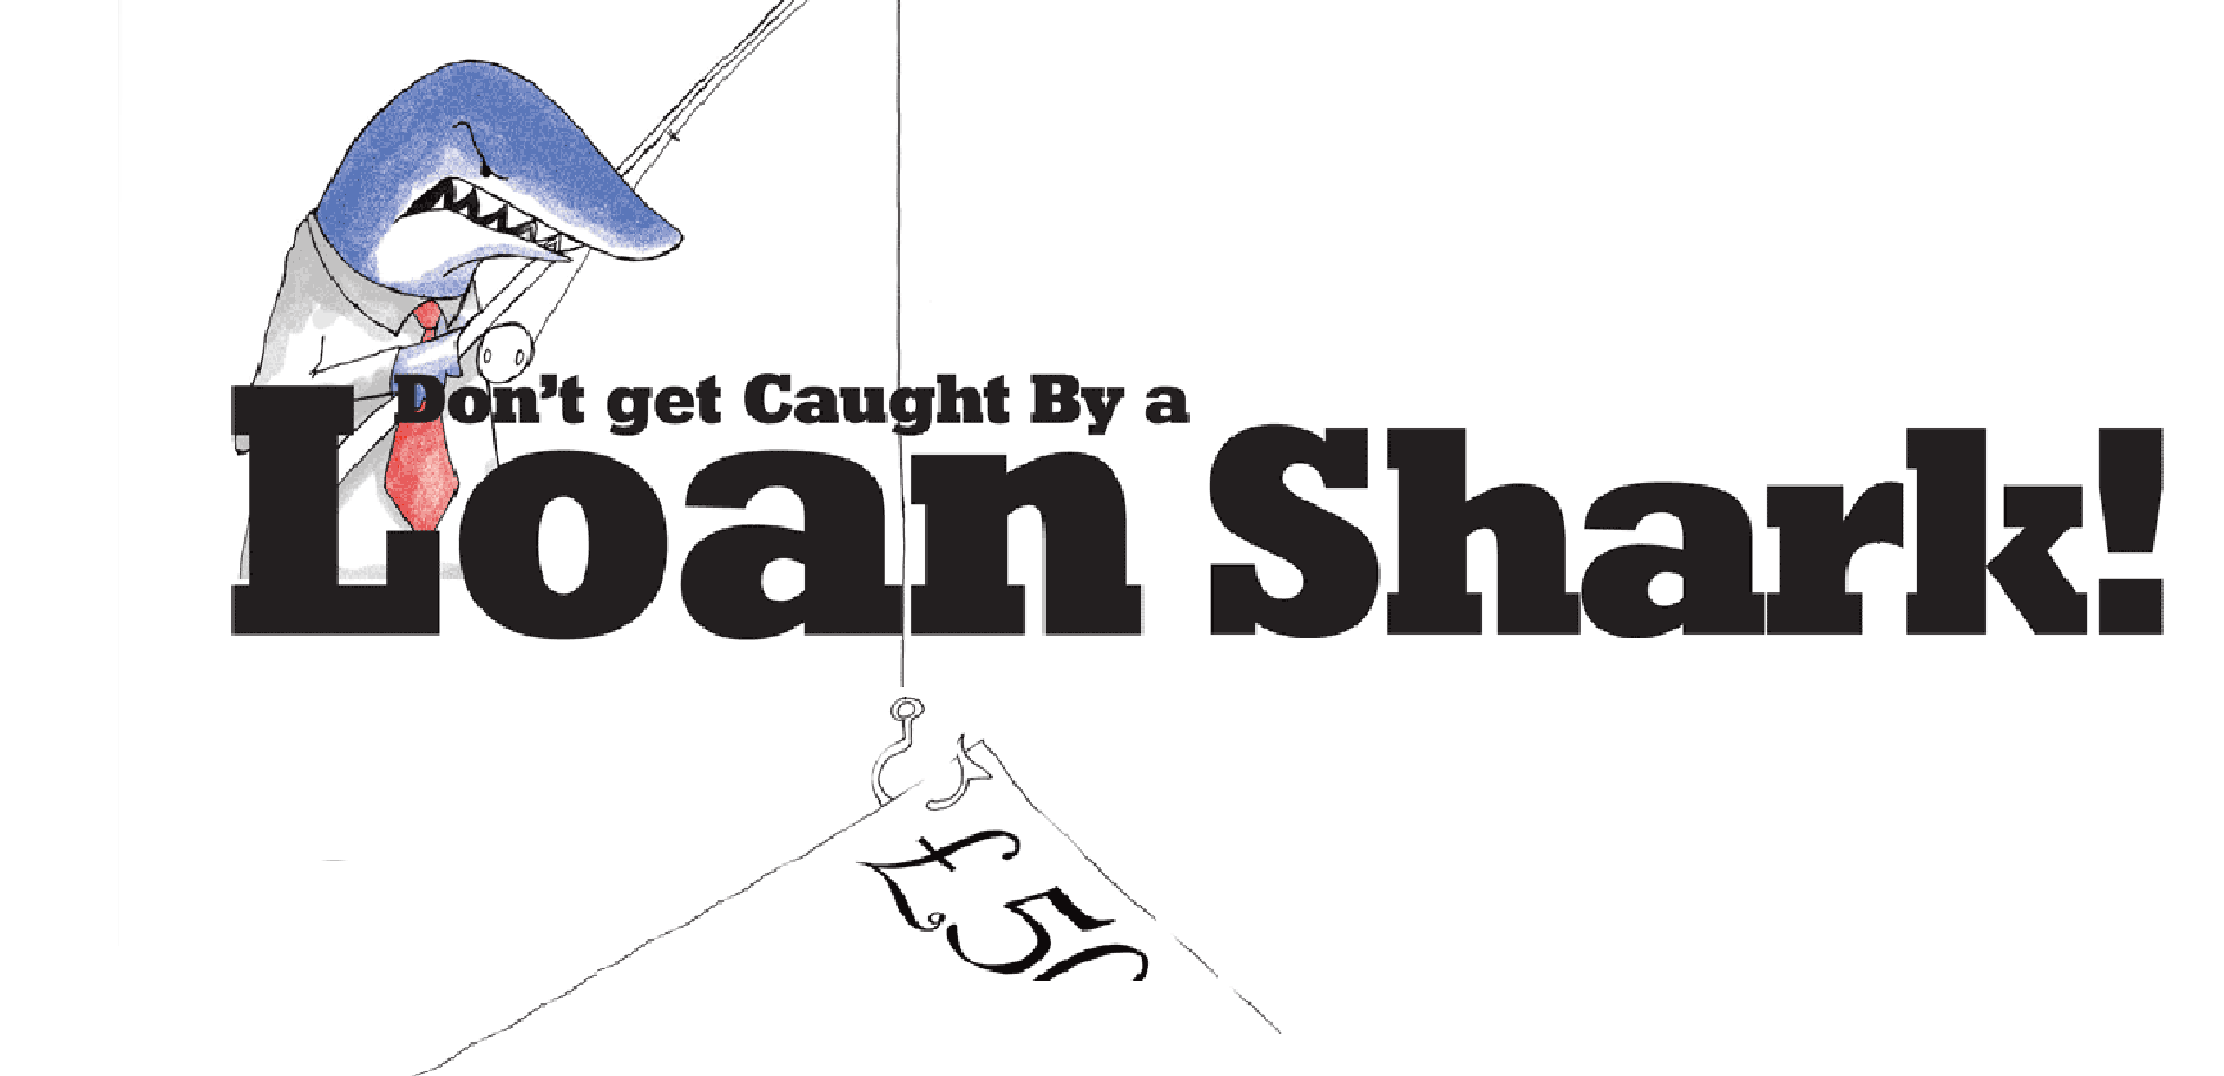 Dealing With Loan Sharks Could Cost Arm And Leg Warn Salford And